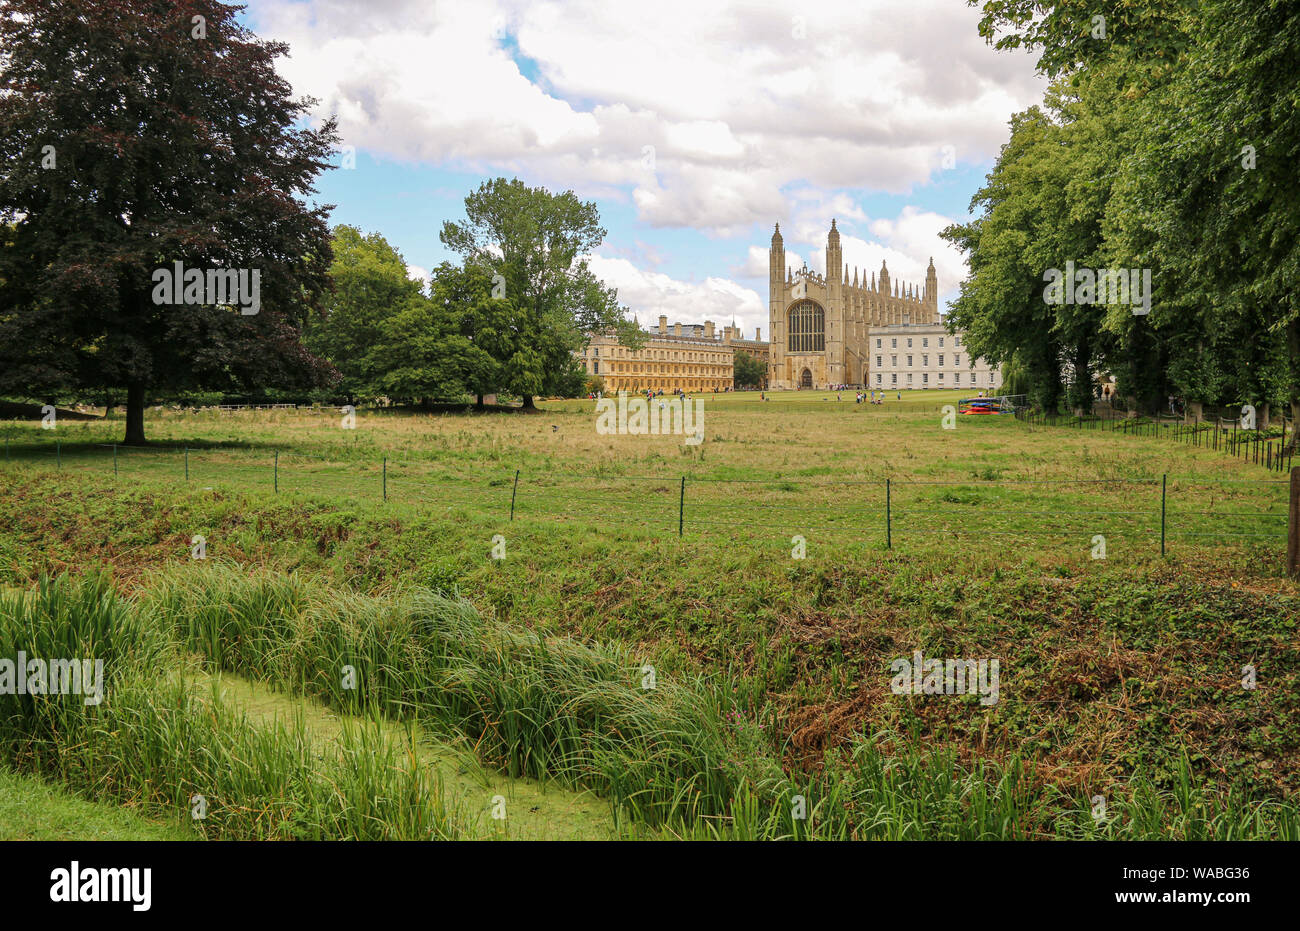 Wonderful view of King's College, Cambridge, part of the University, from The Backs, seeing the river Cam, Camrbidge, Great Britain Stock Photo